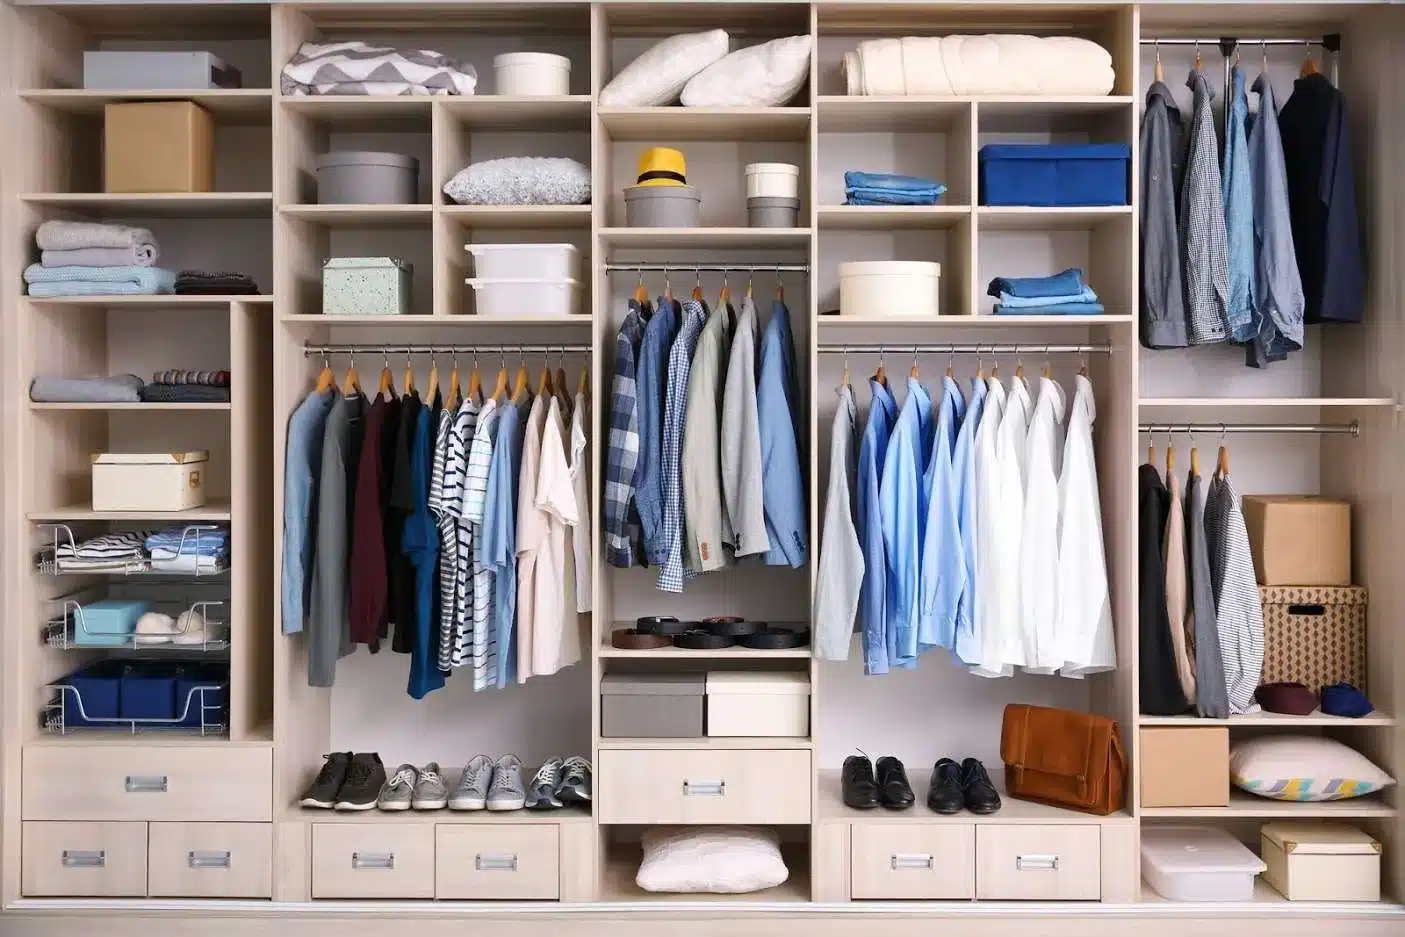 How To Add Shelves To A Wardrobe